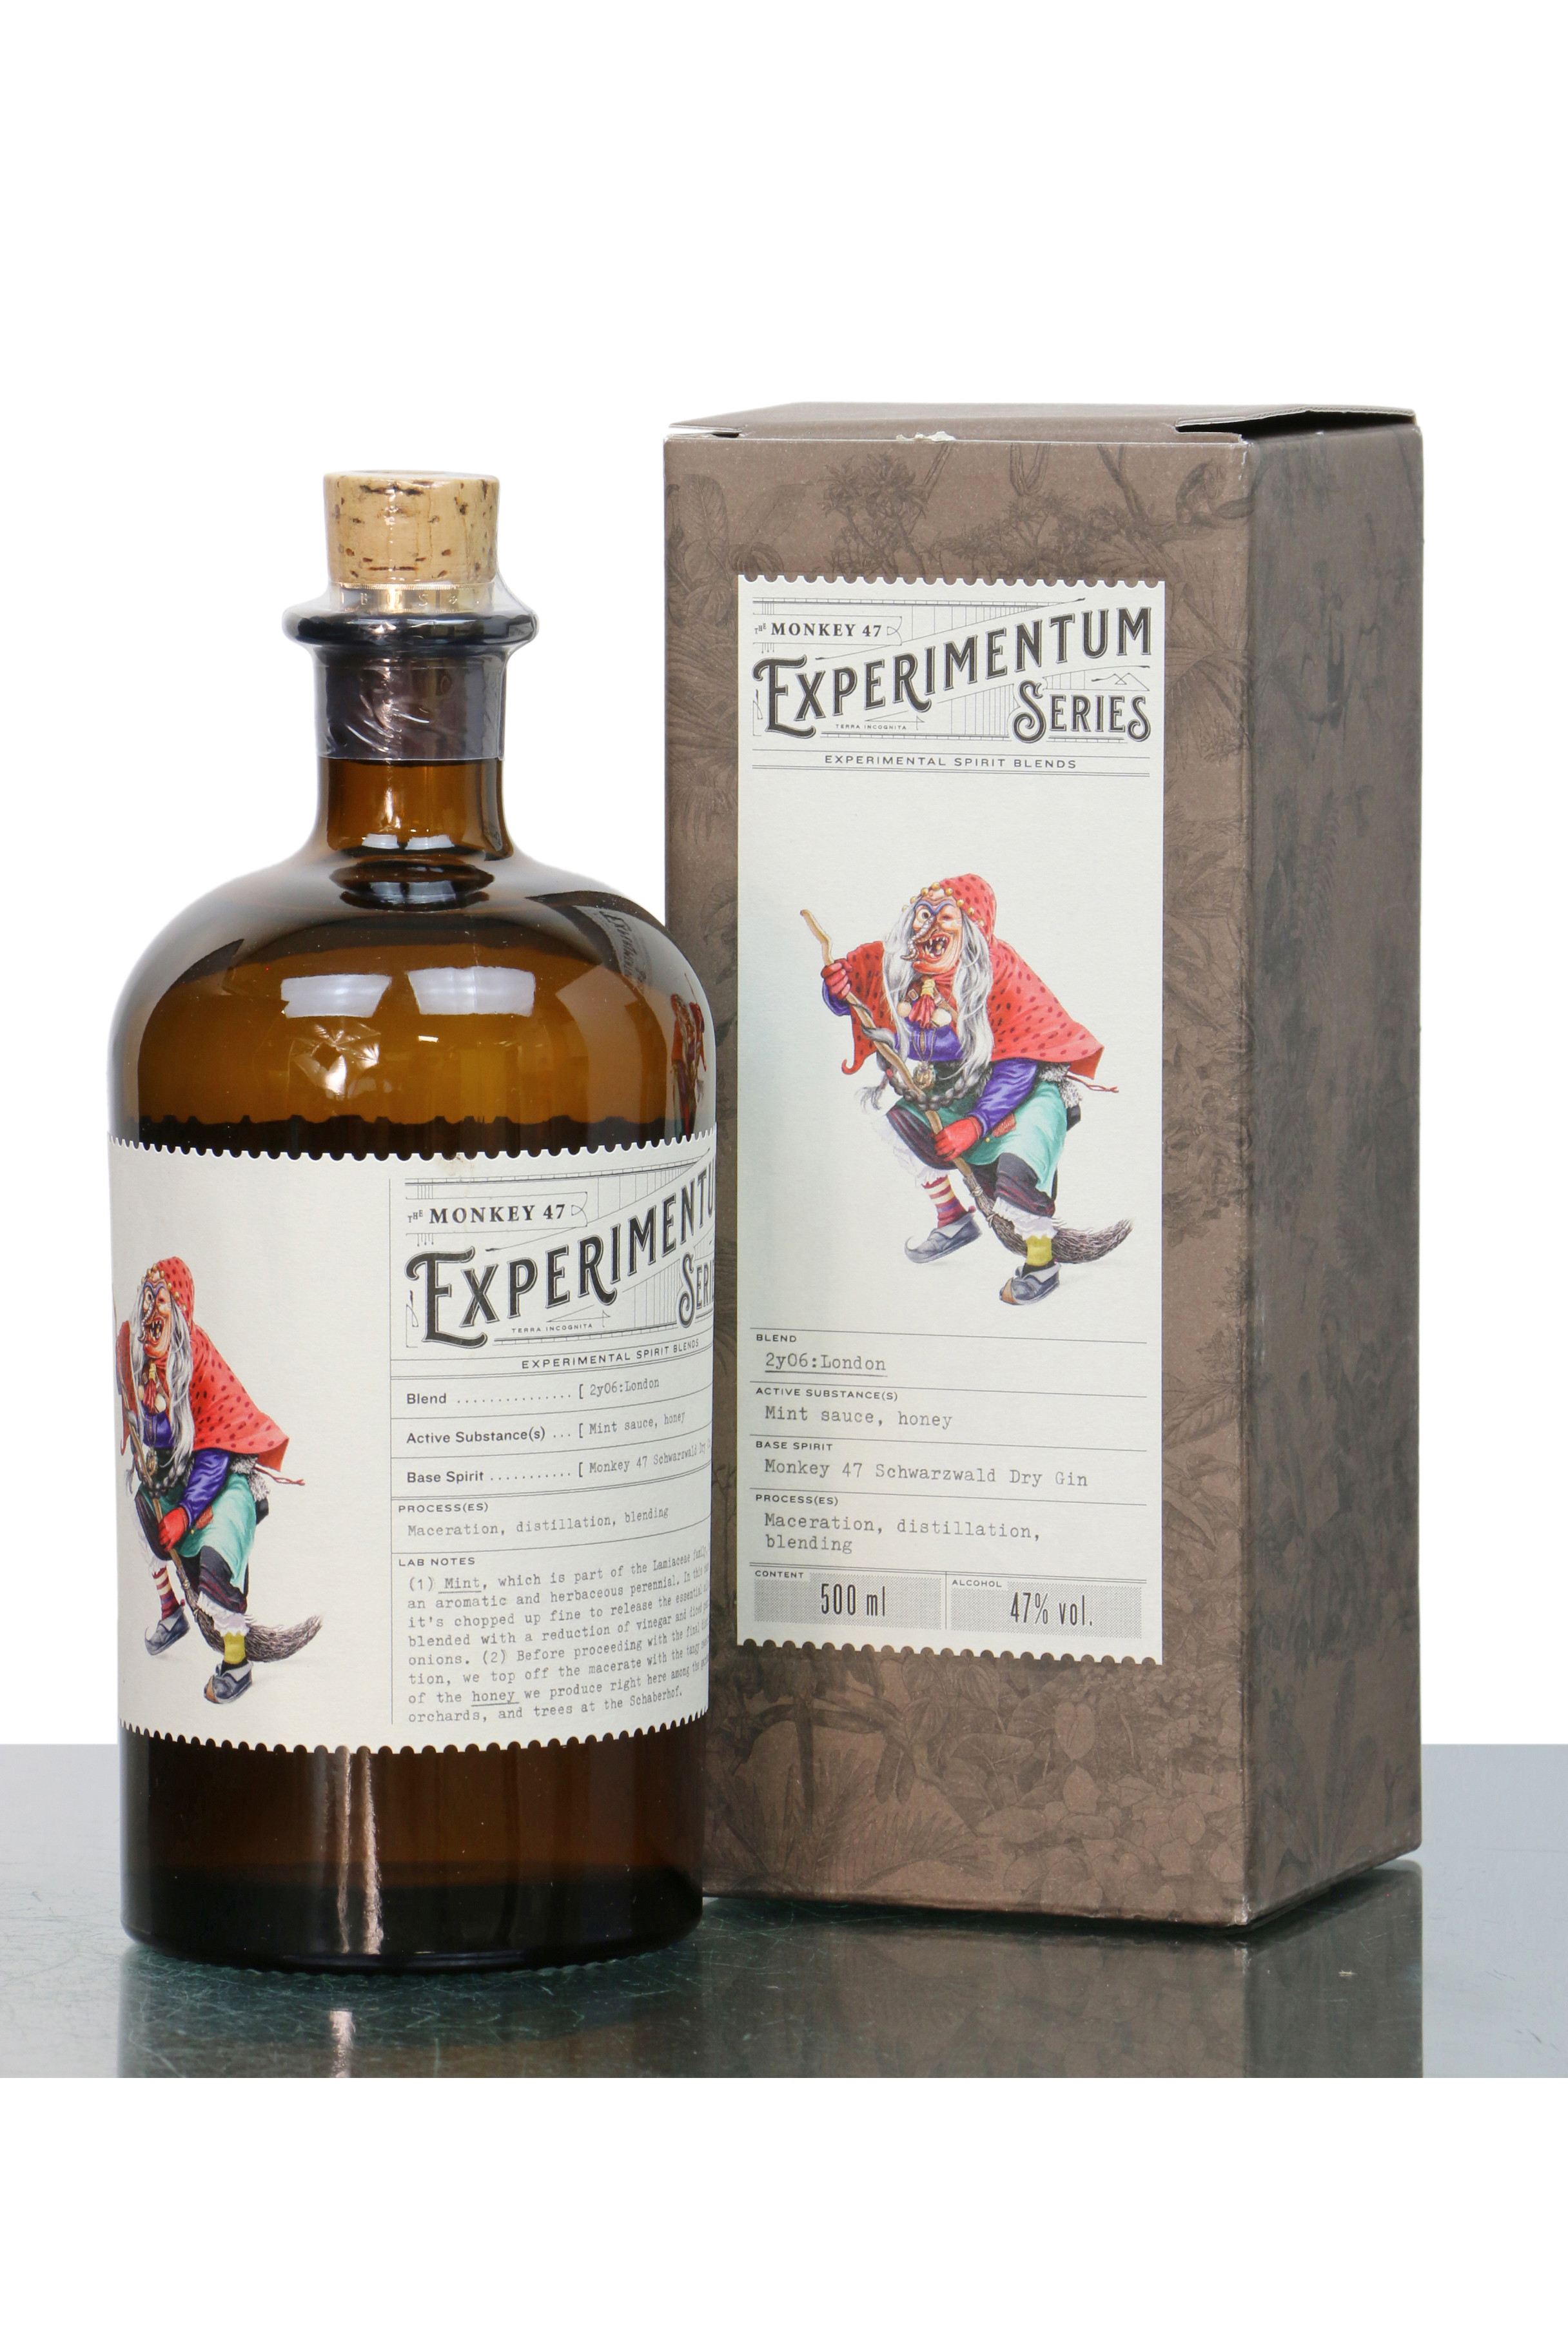 Monkey 47 Schwarzwald Dry Gin 2yo6 London - Experimentum Series (50cl) -  Just Whisky Auctions